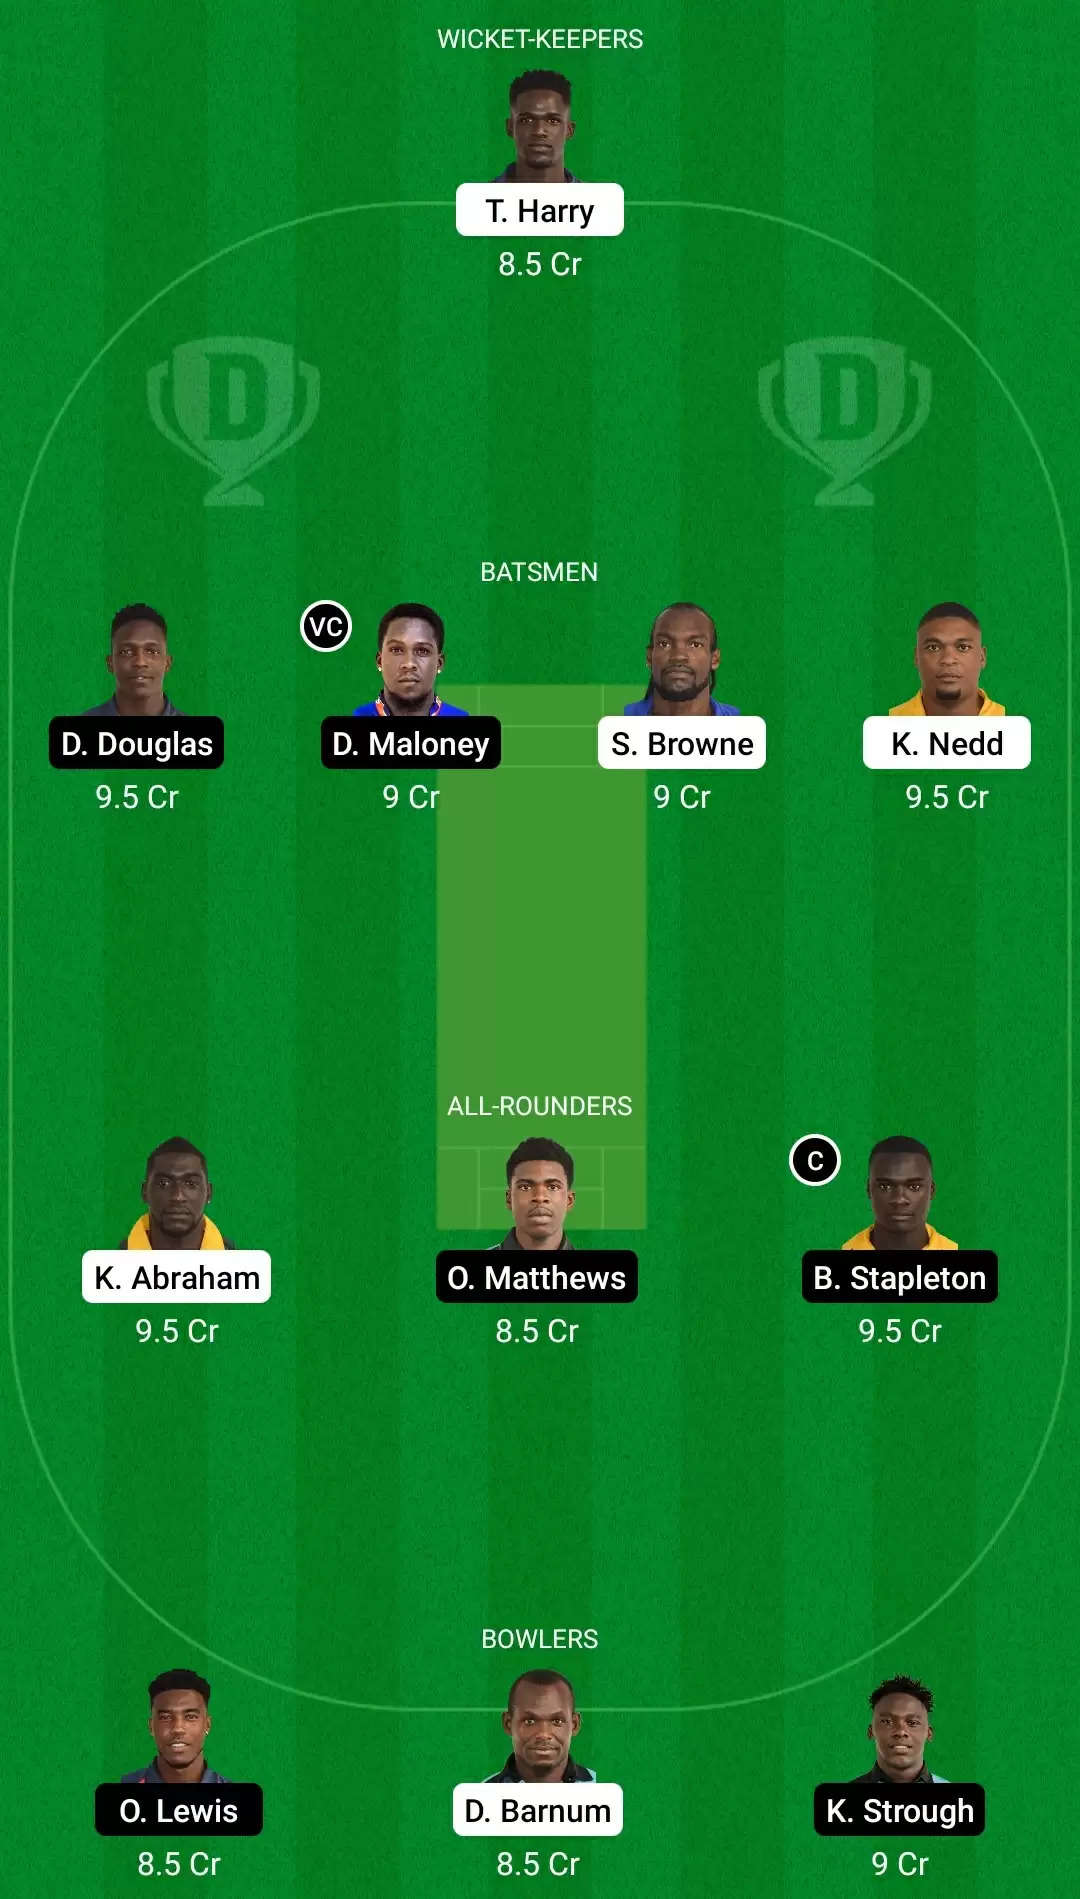 Vincy Premier League 2021, Match 16: GRD vs LSH Dream11 Prediction, Fantasy Cricket Tips, Team, Playing 11, Pitch Report, Weather Conditions and Injury Update